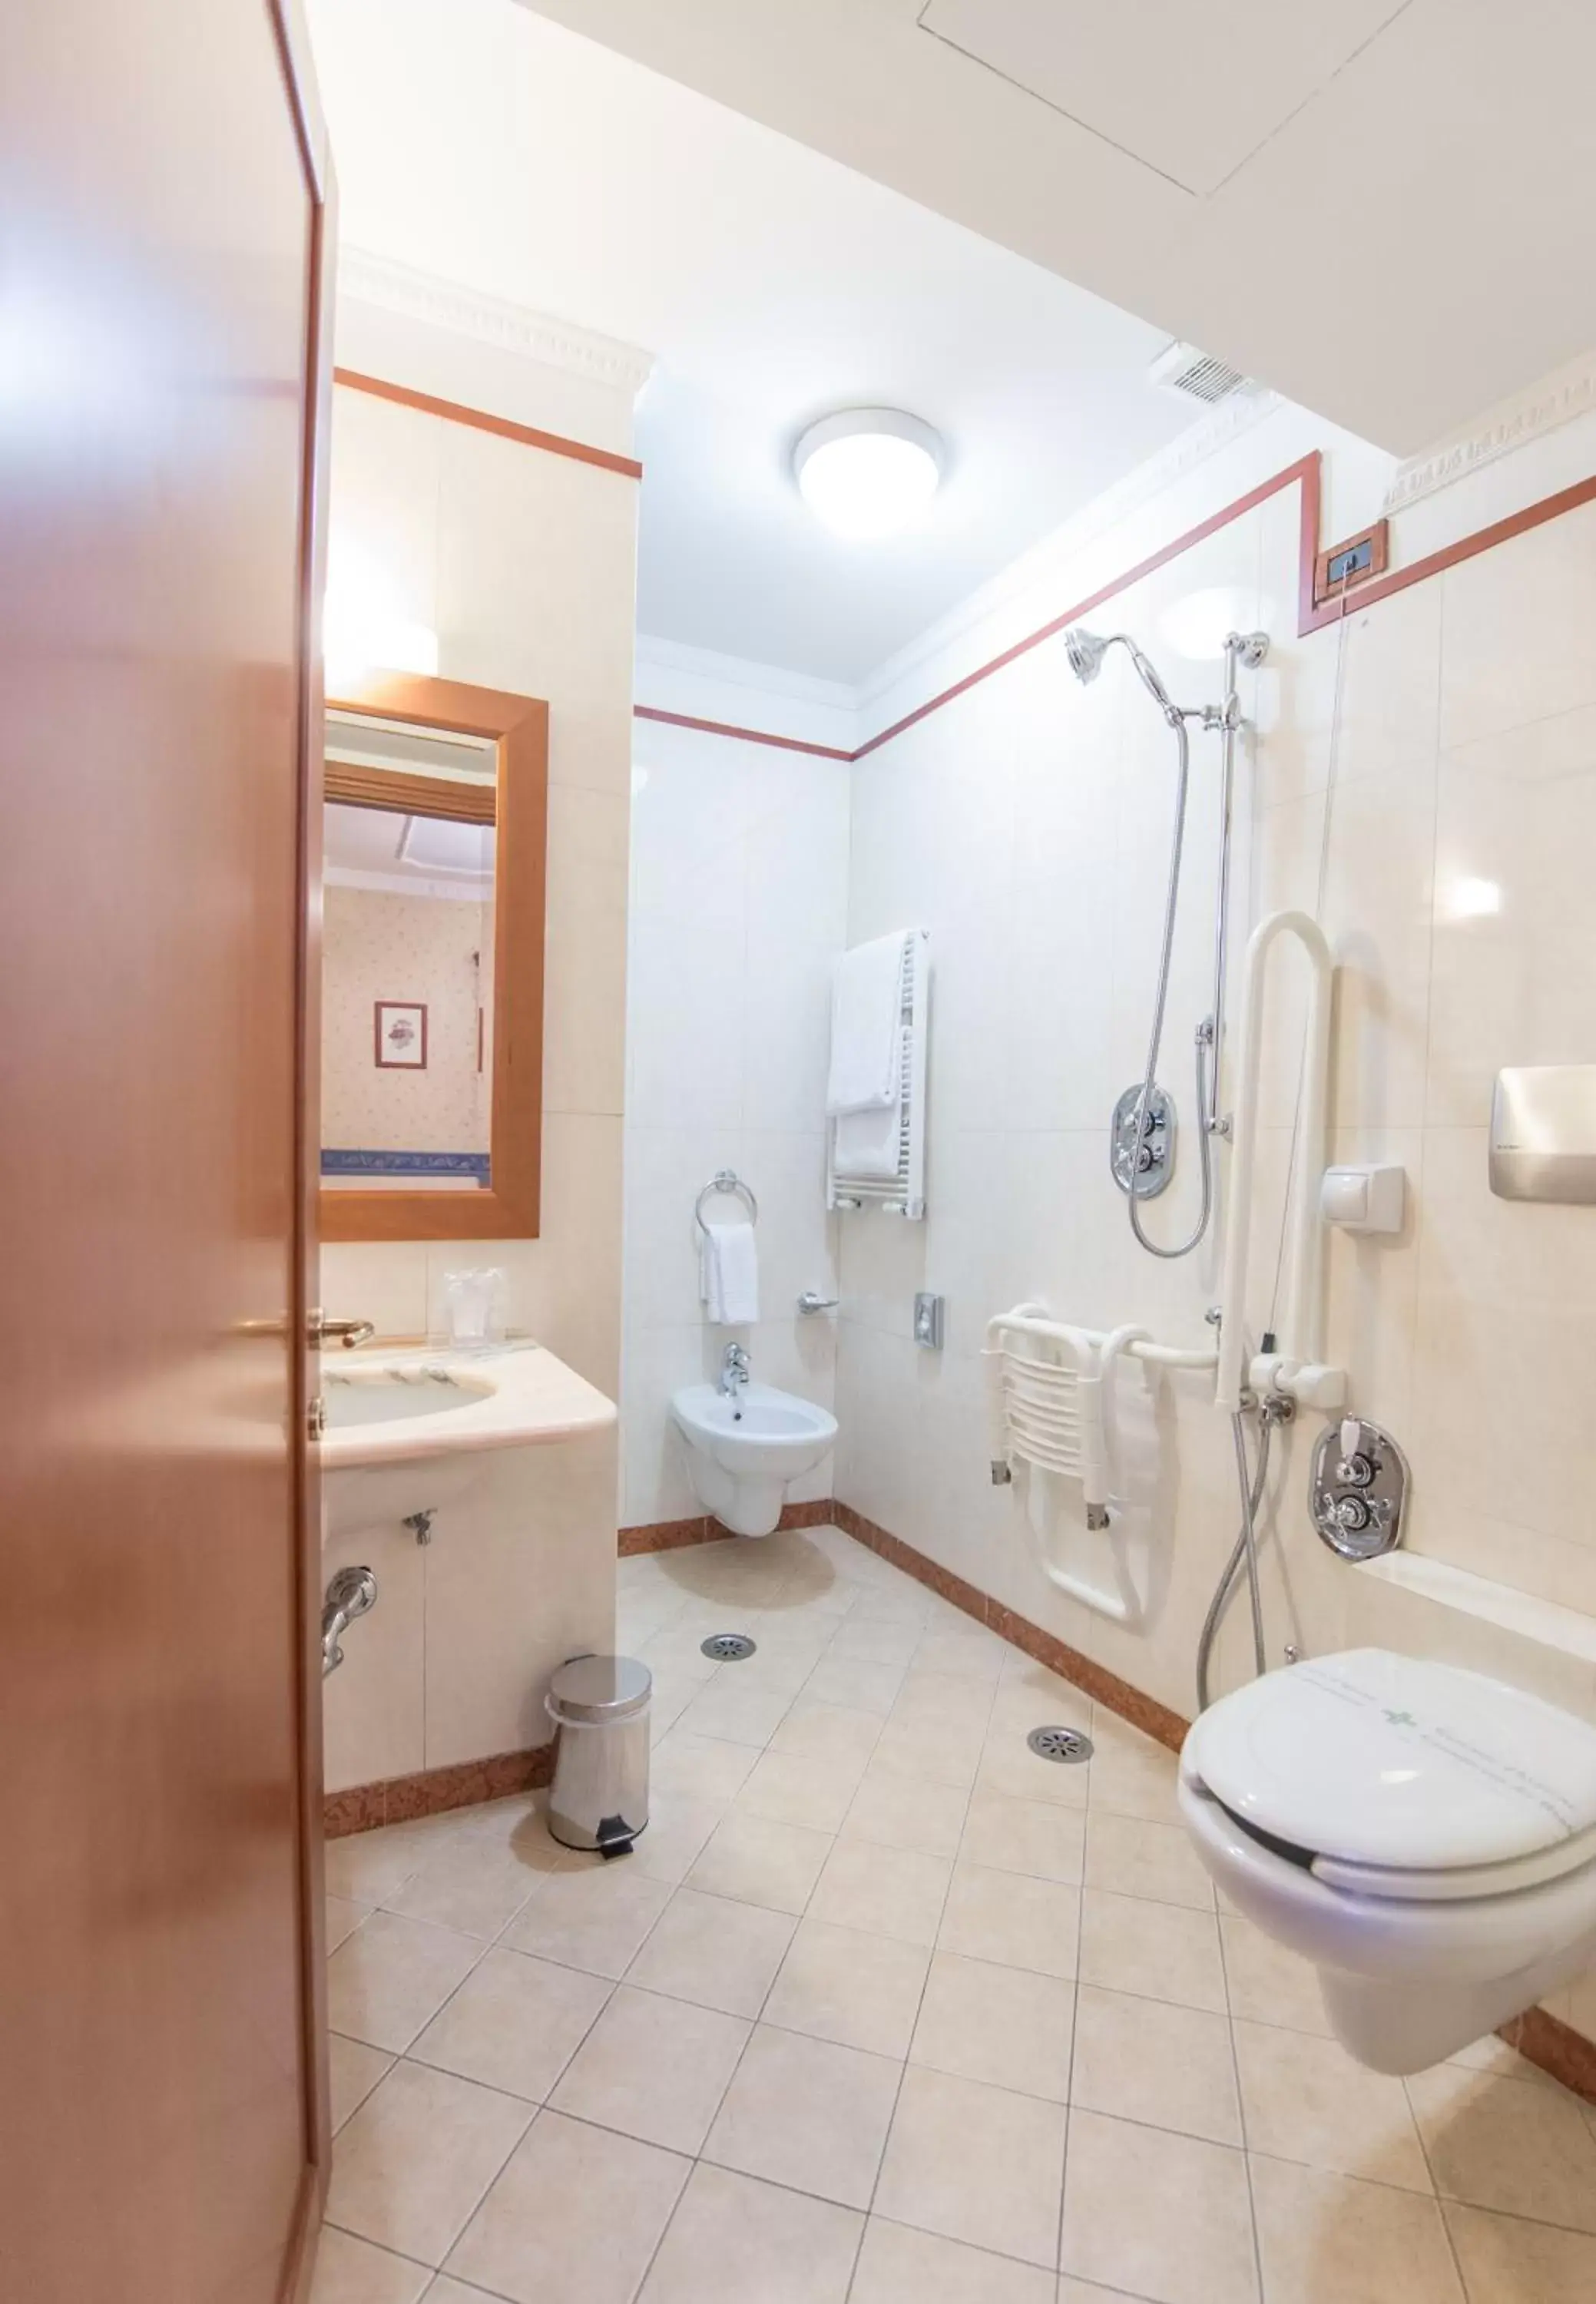 Facility for disabled guests, Bathroom in Diana Park Hotel